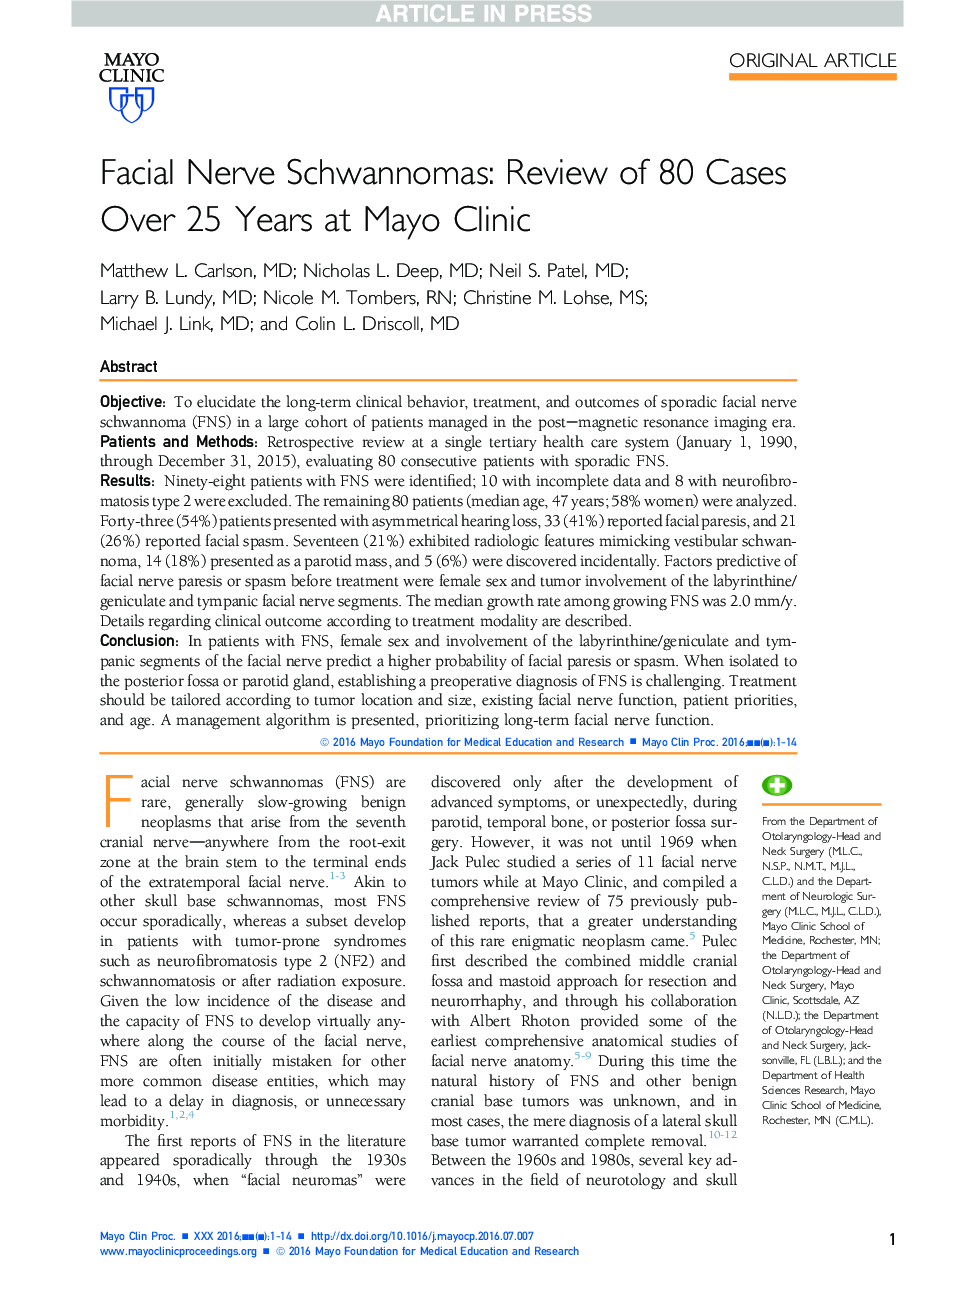 Facial Nerve Schwannomas: Review of 80 Cases Over 25 Years at Mayo Clinic